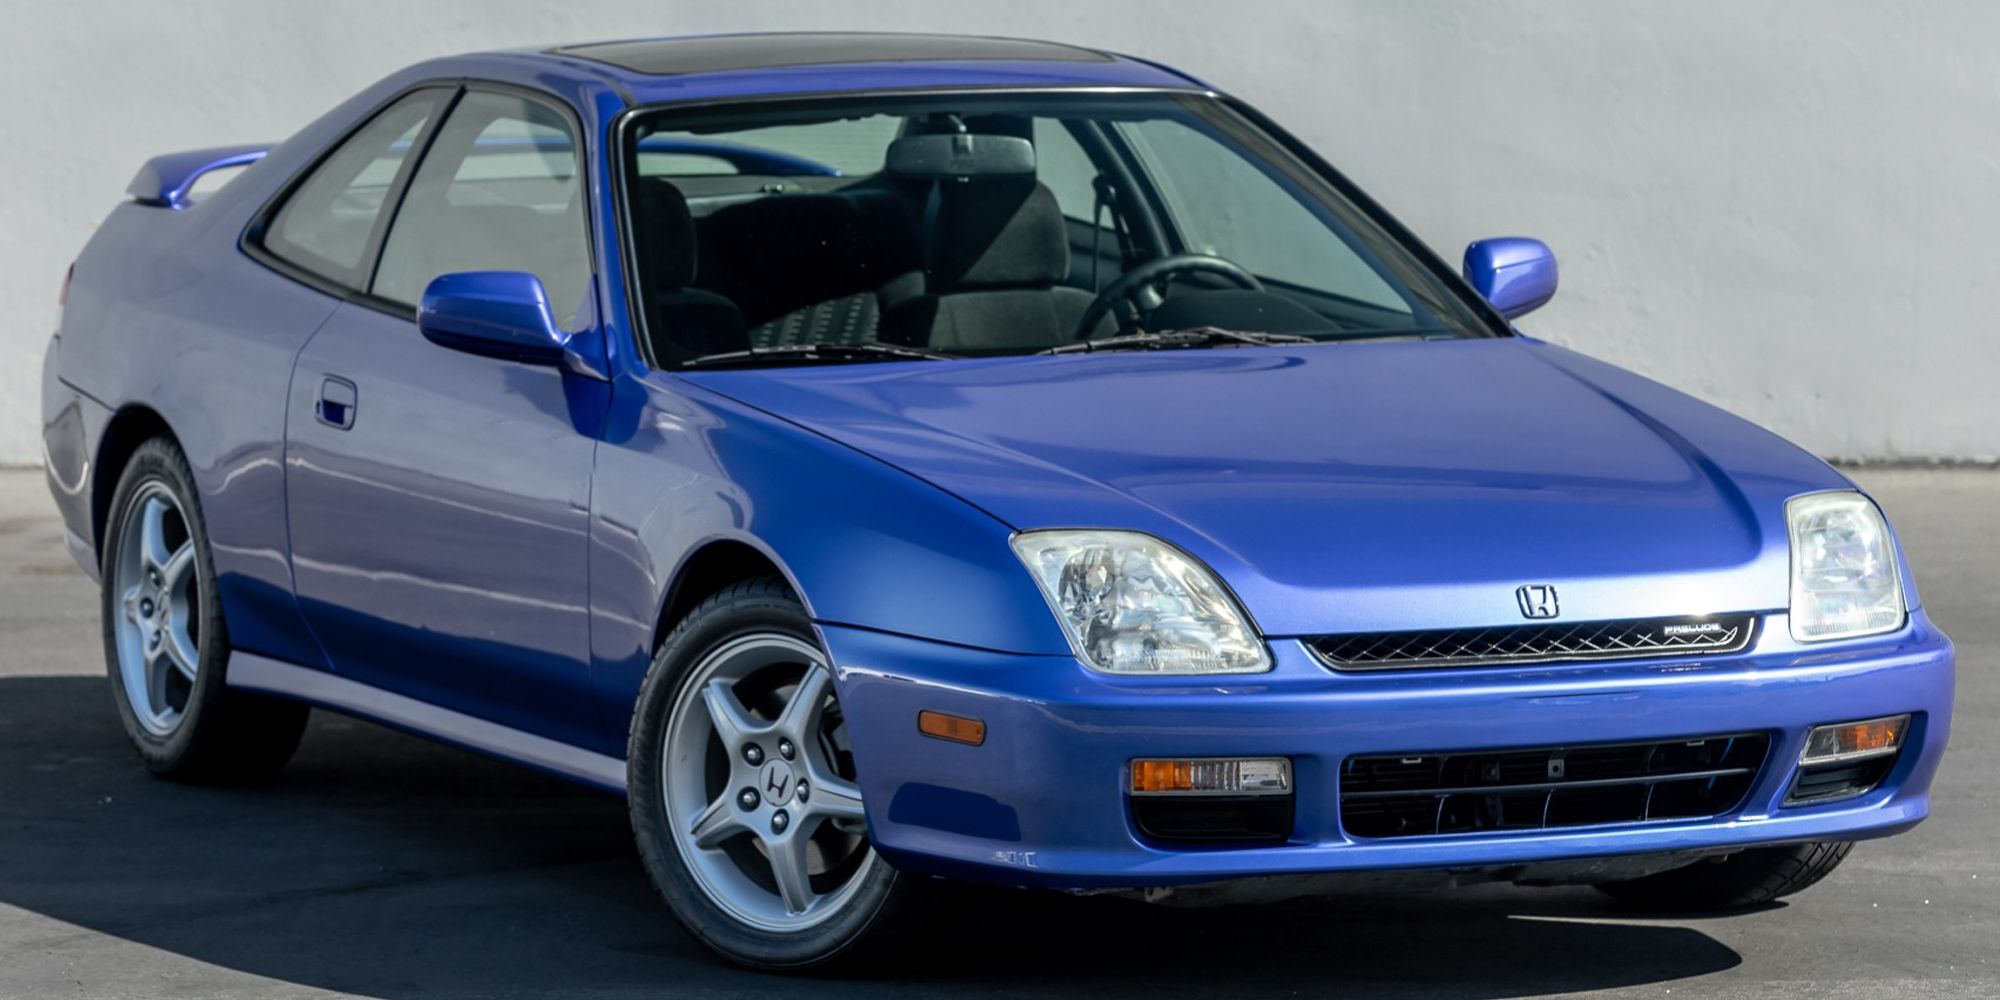 A blue Prelude Type SH